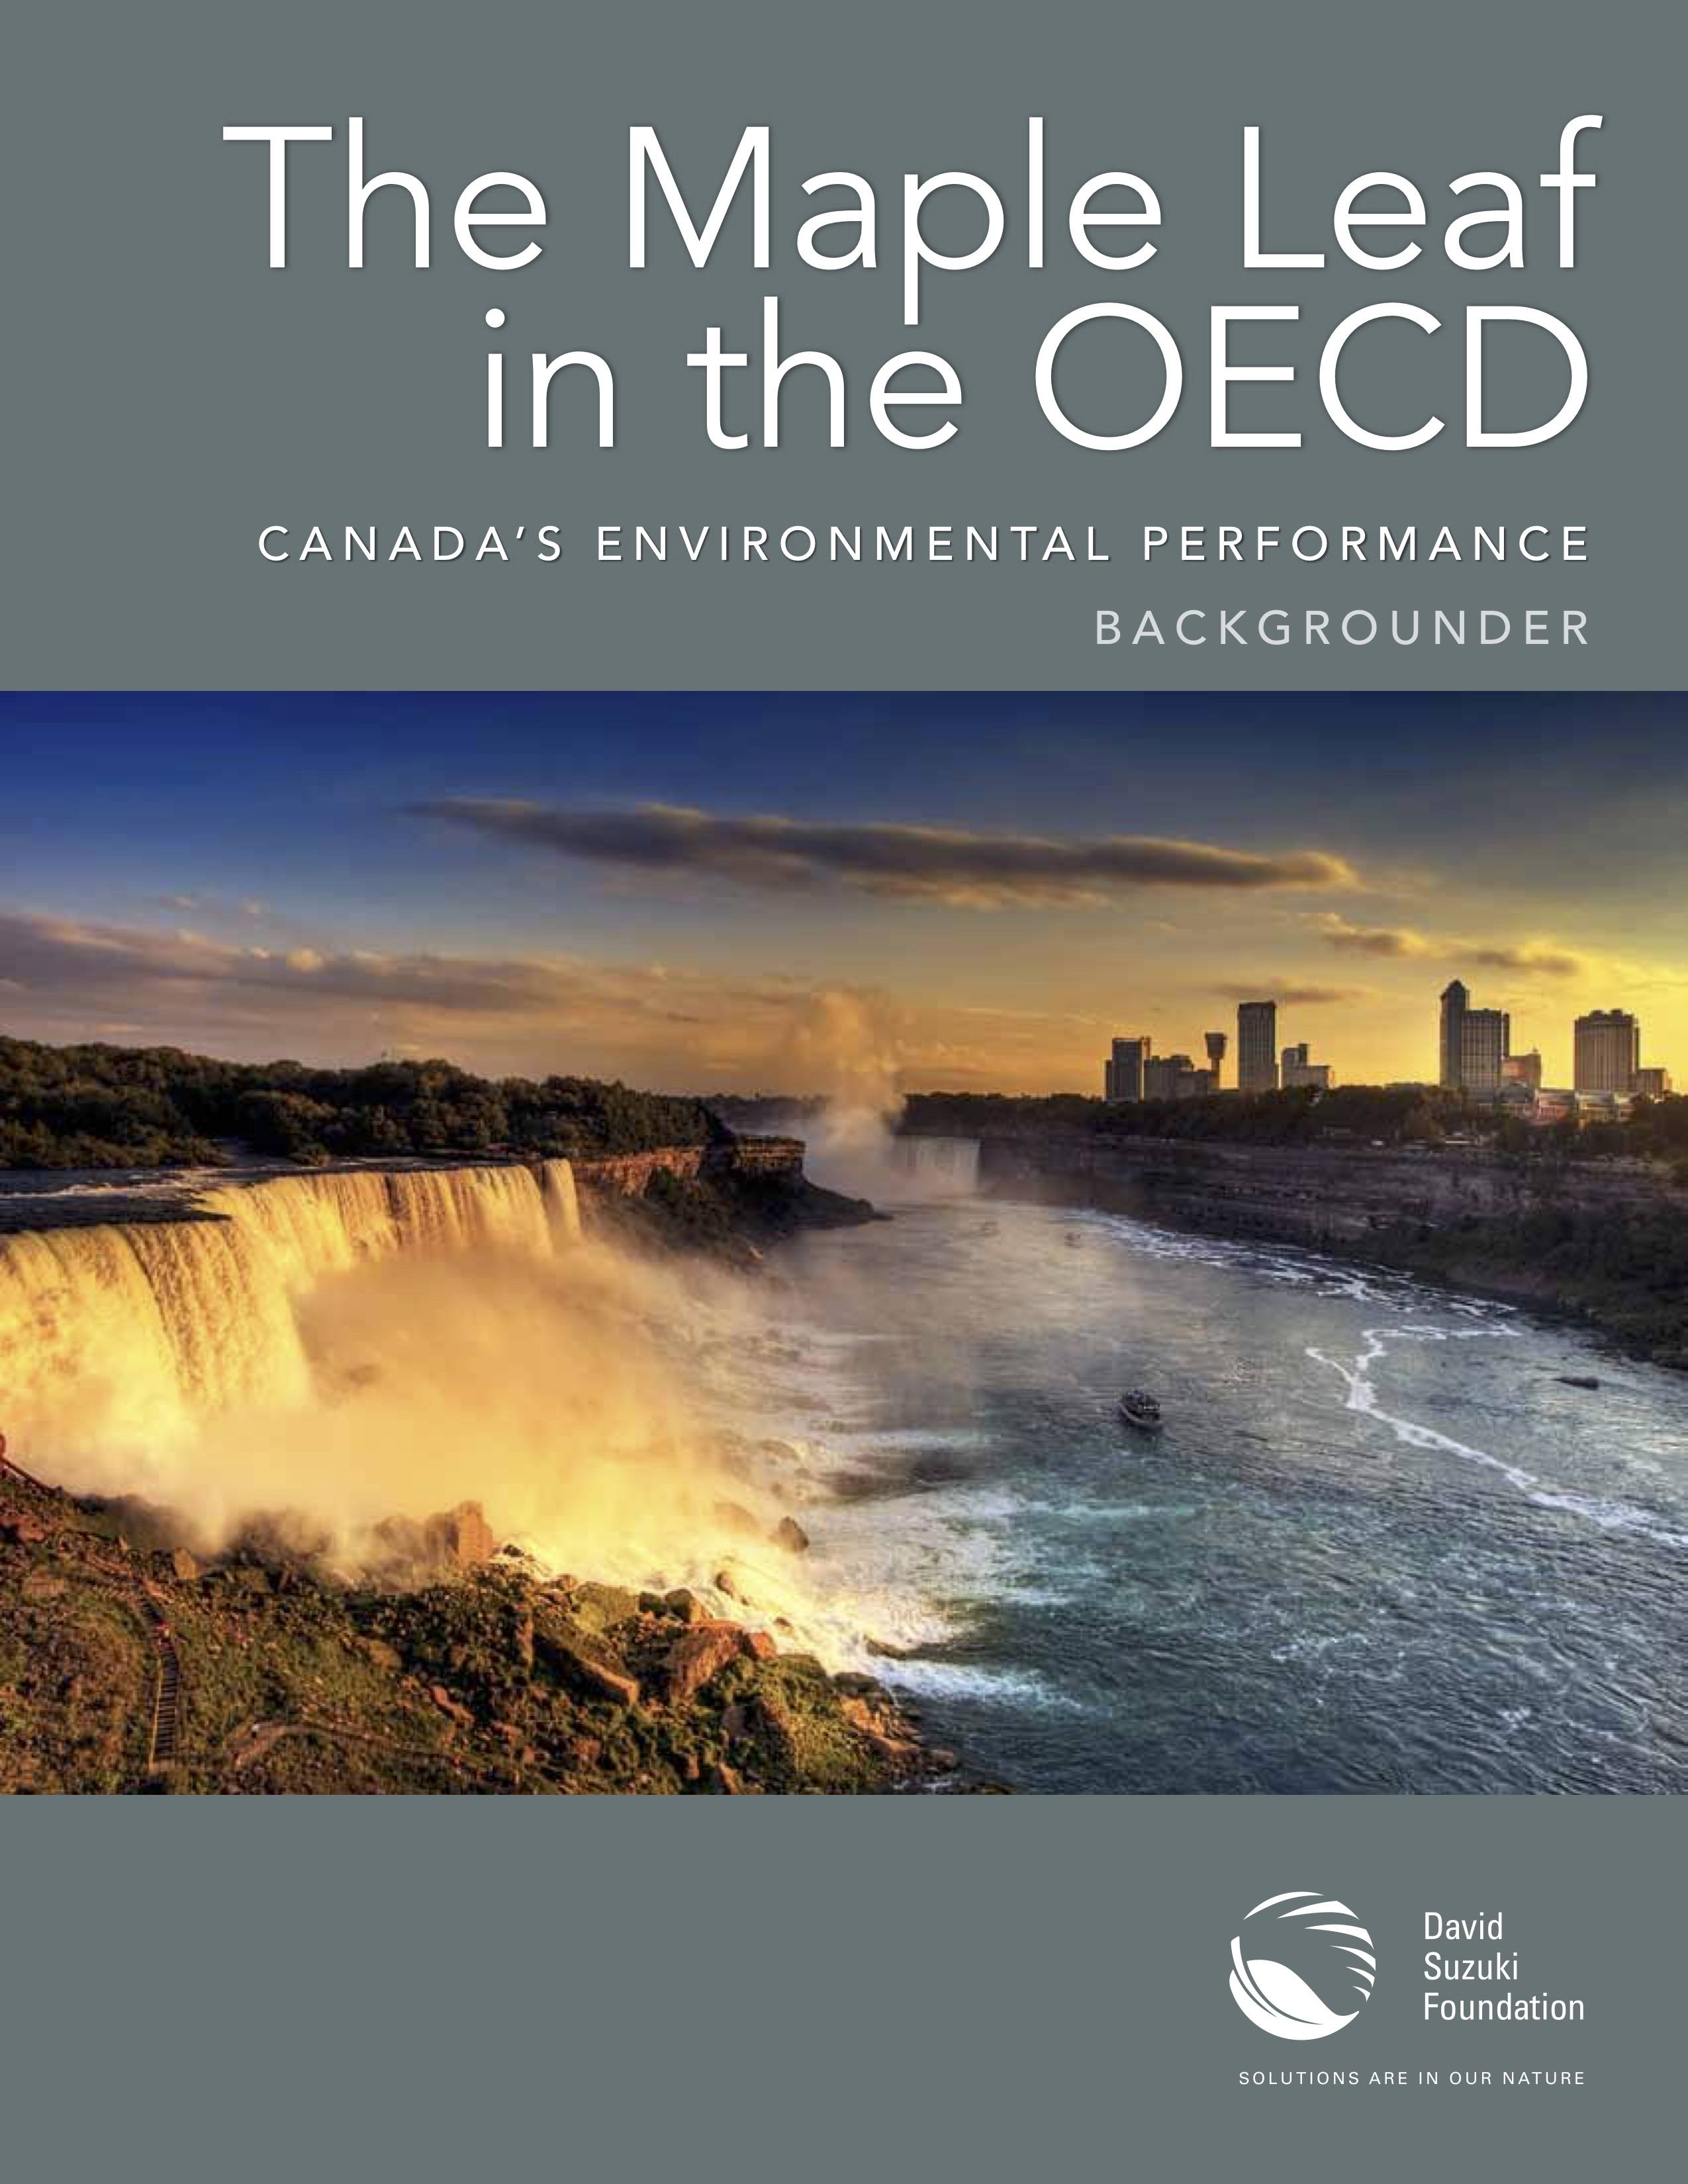 BACKGROUNDER — The Maple Leaf in the OECD: Canada's Environmental Performance